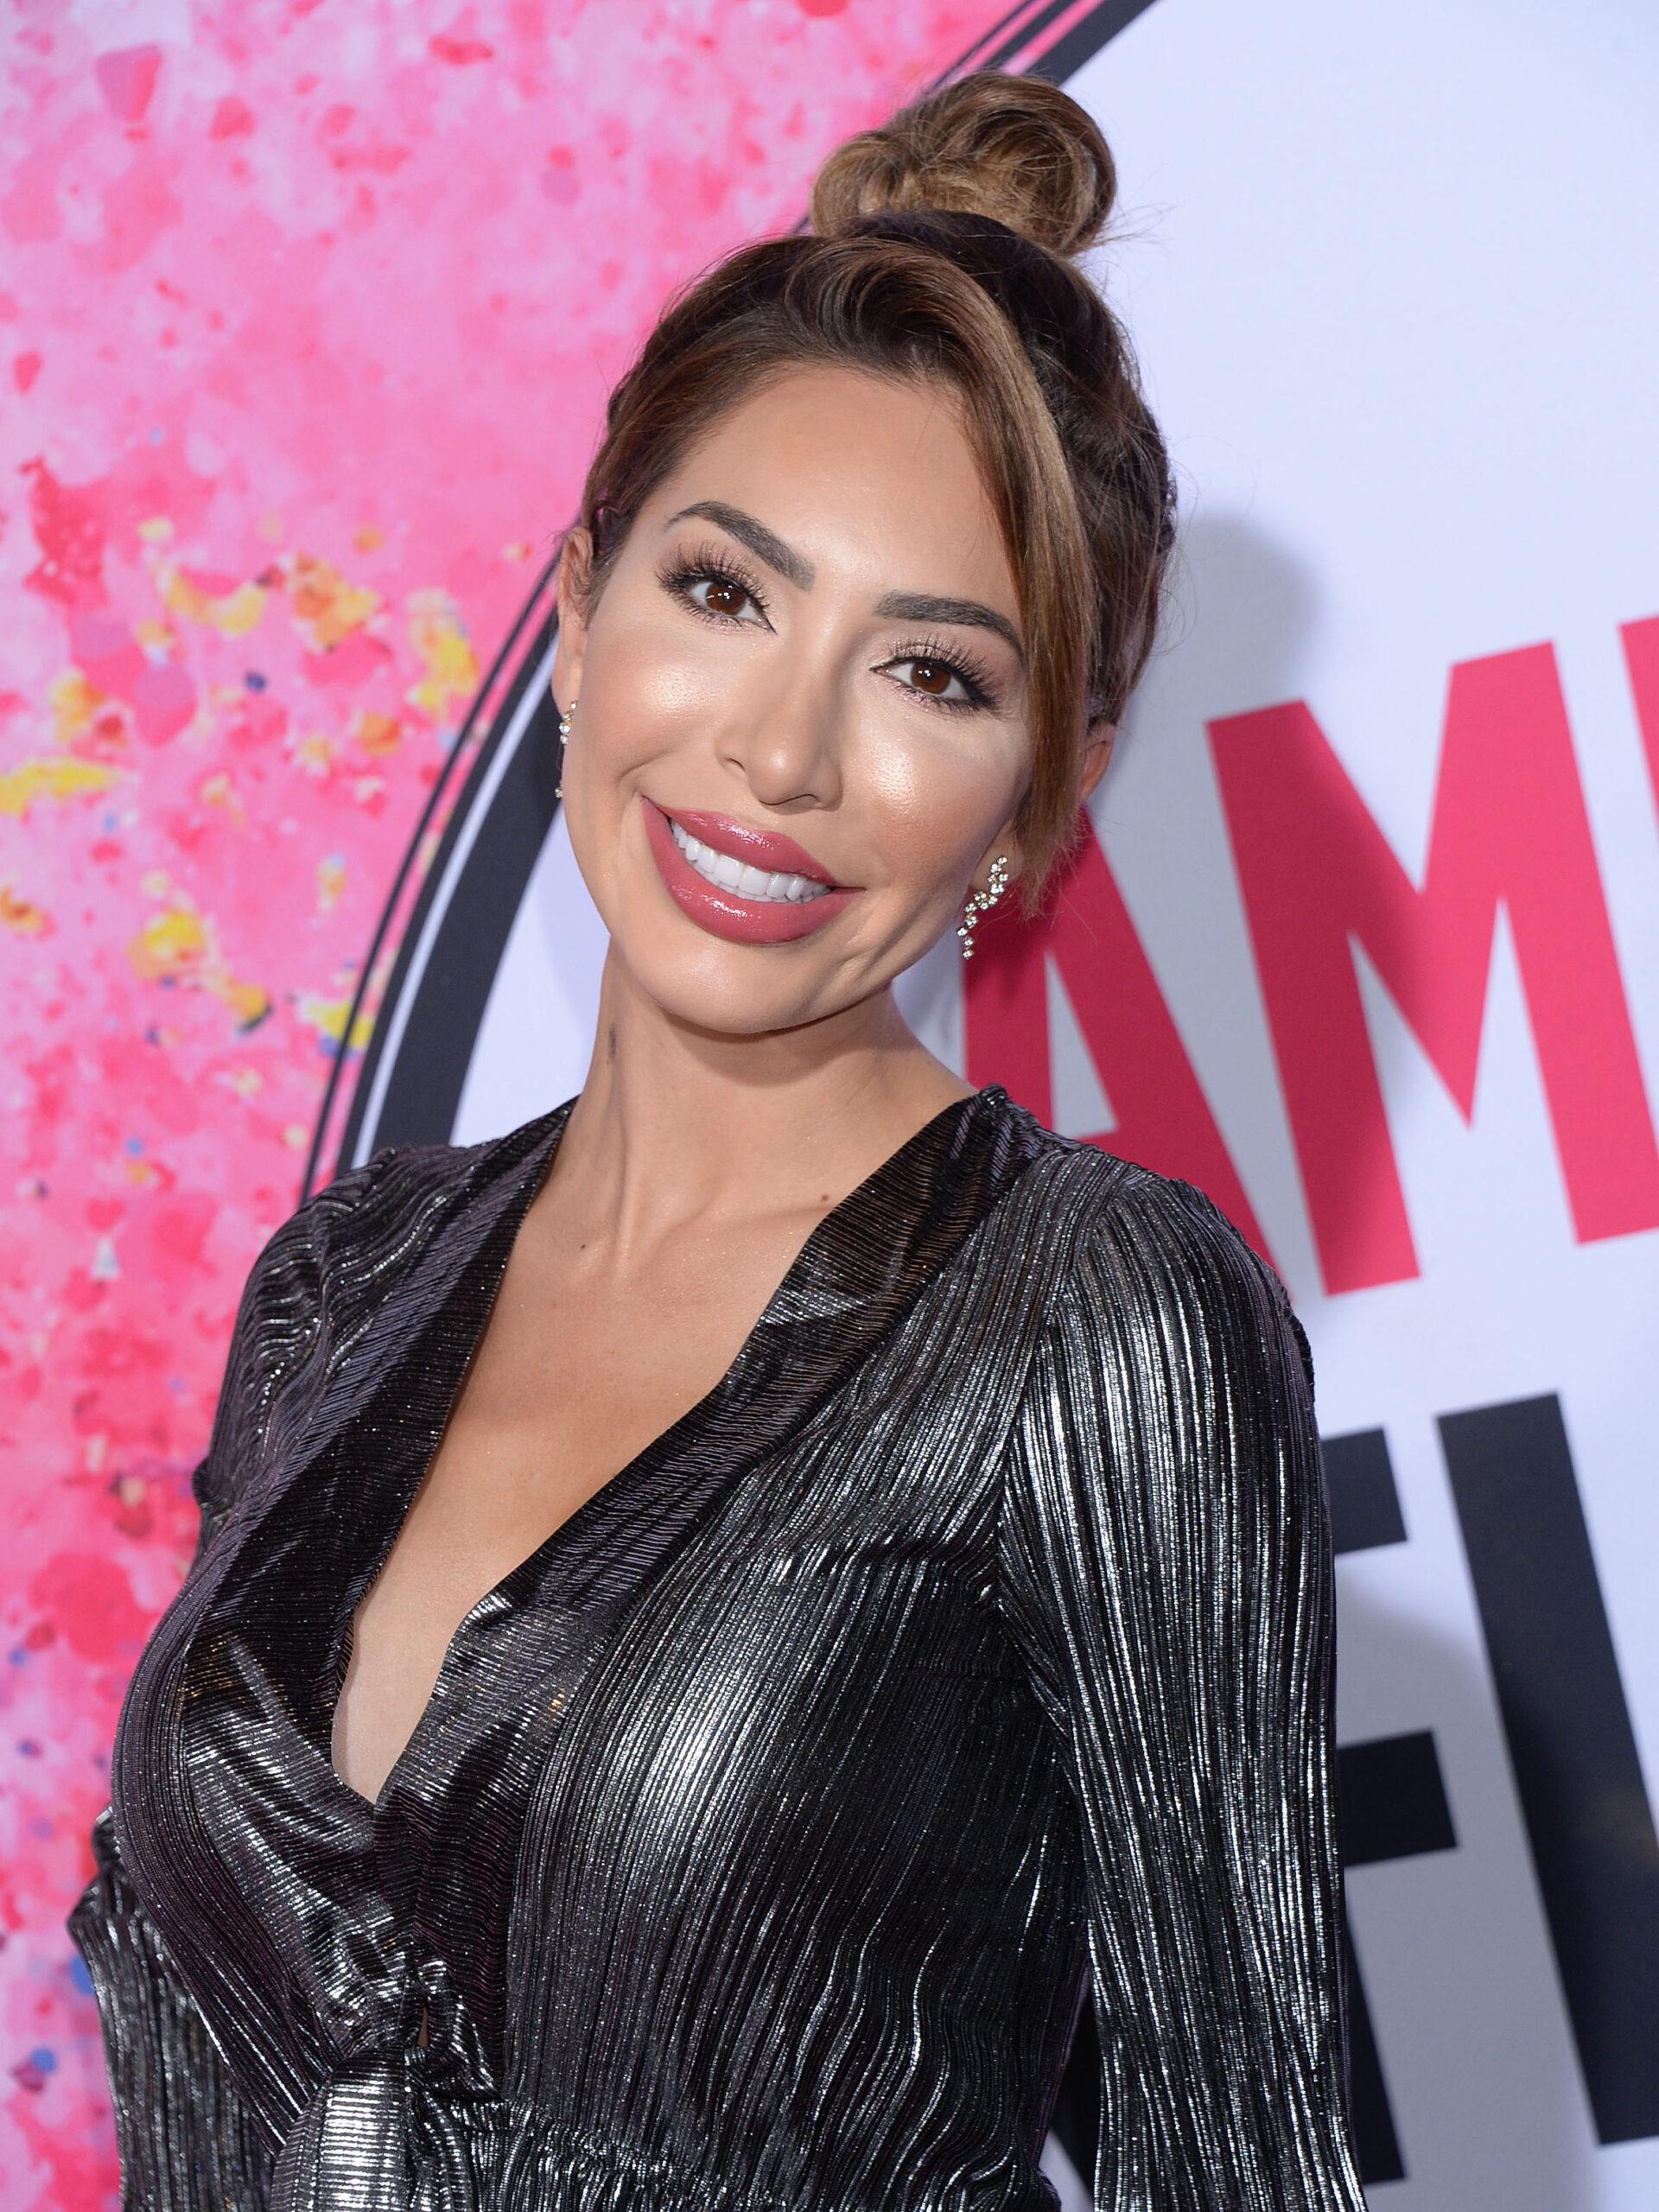 Farrah Abraham attends the 2nd Annual American Influencer Awards